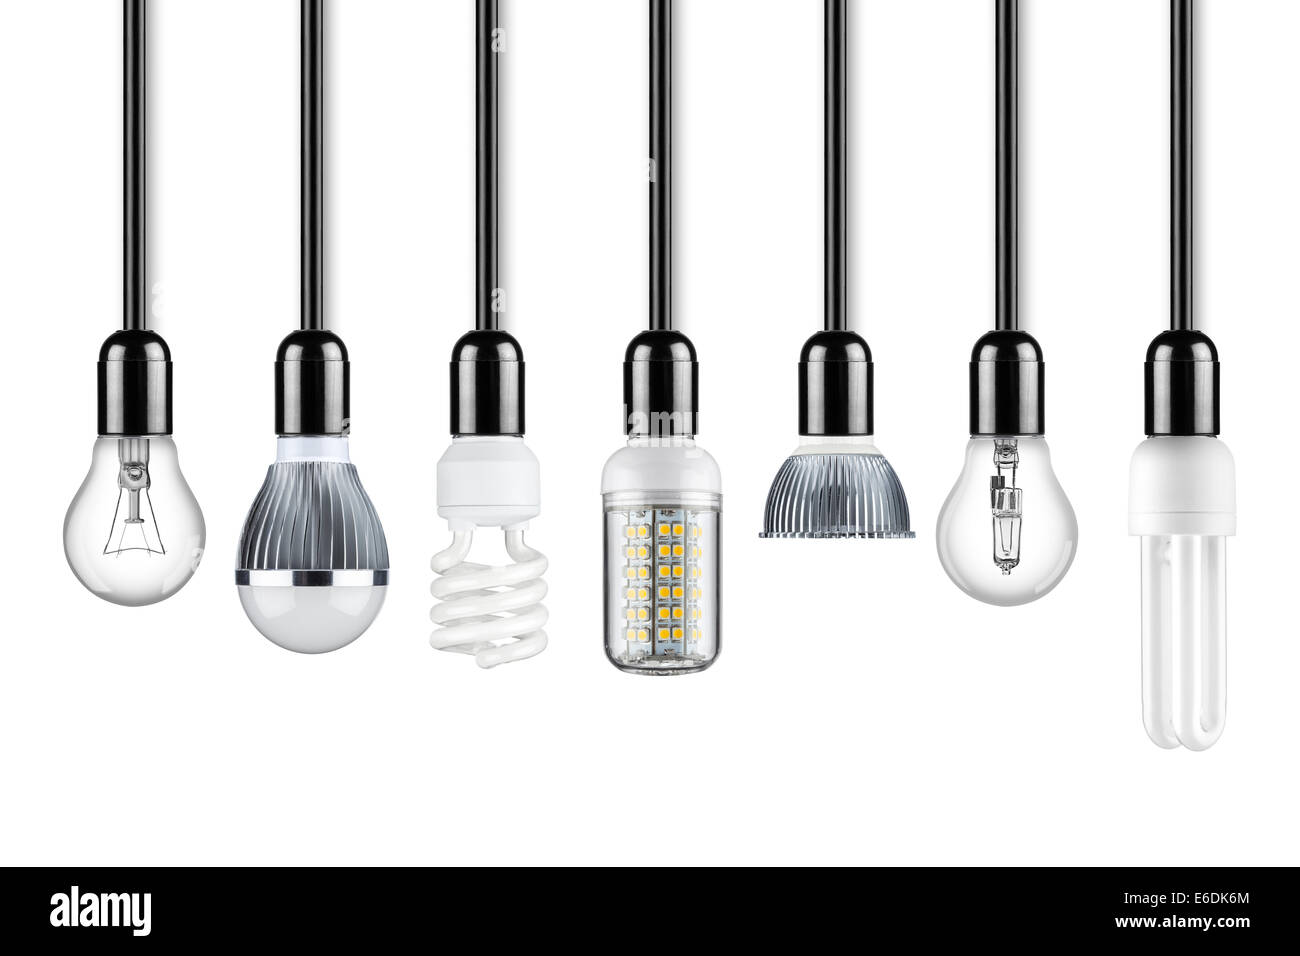 row of different types of light bulbs Stock Photo